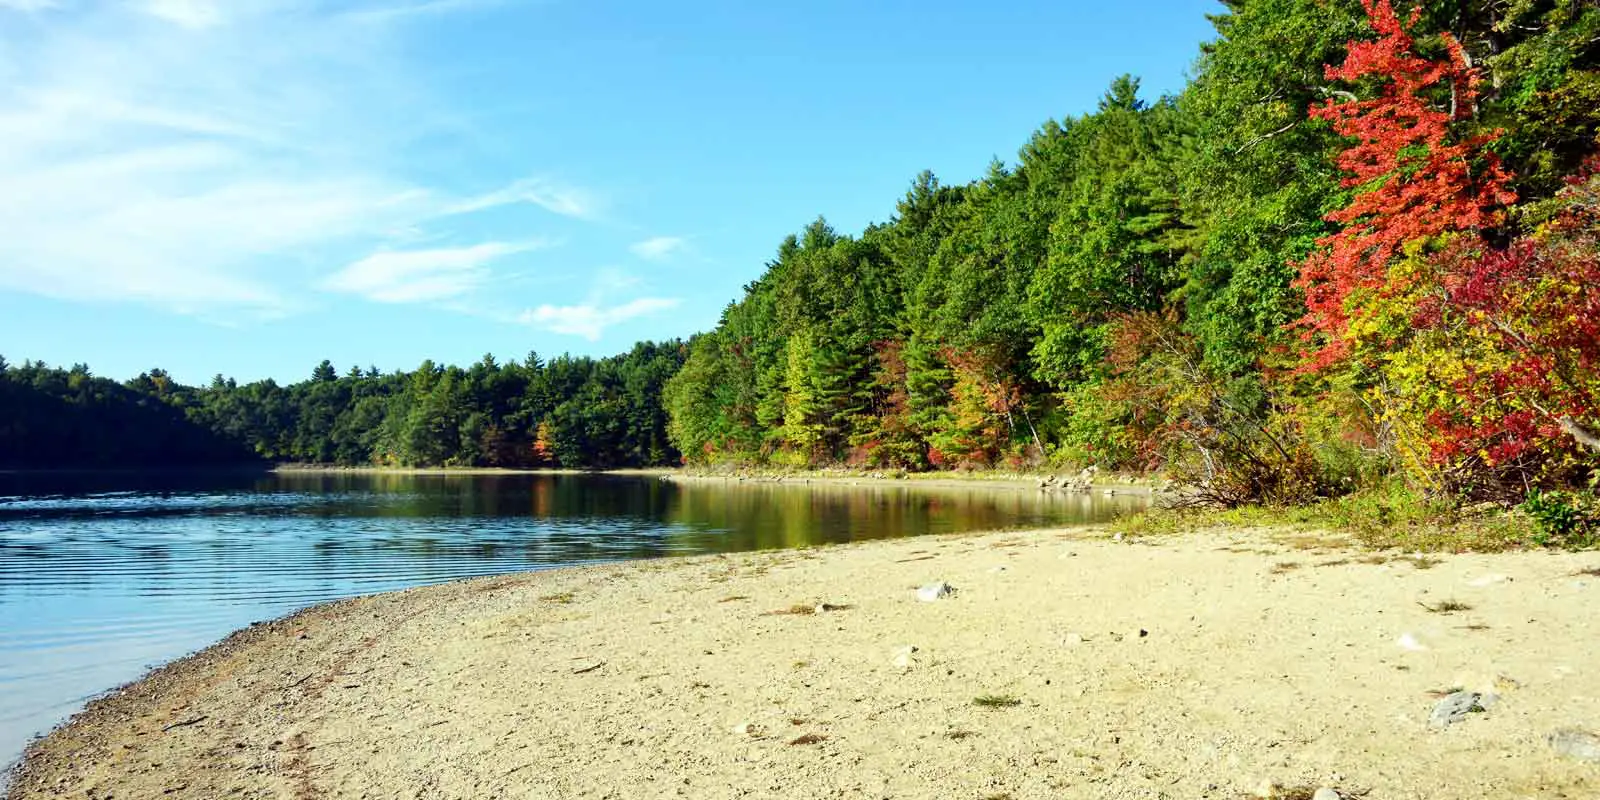 Landscape view of Walden Pond in Concord, MA during the Fall season with red, yellow and green trees in the background.